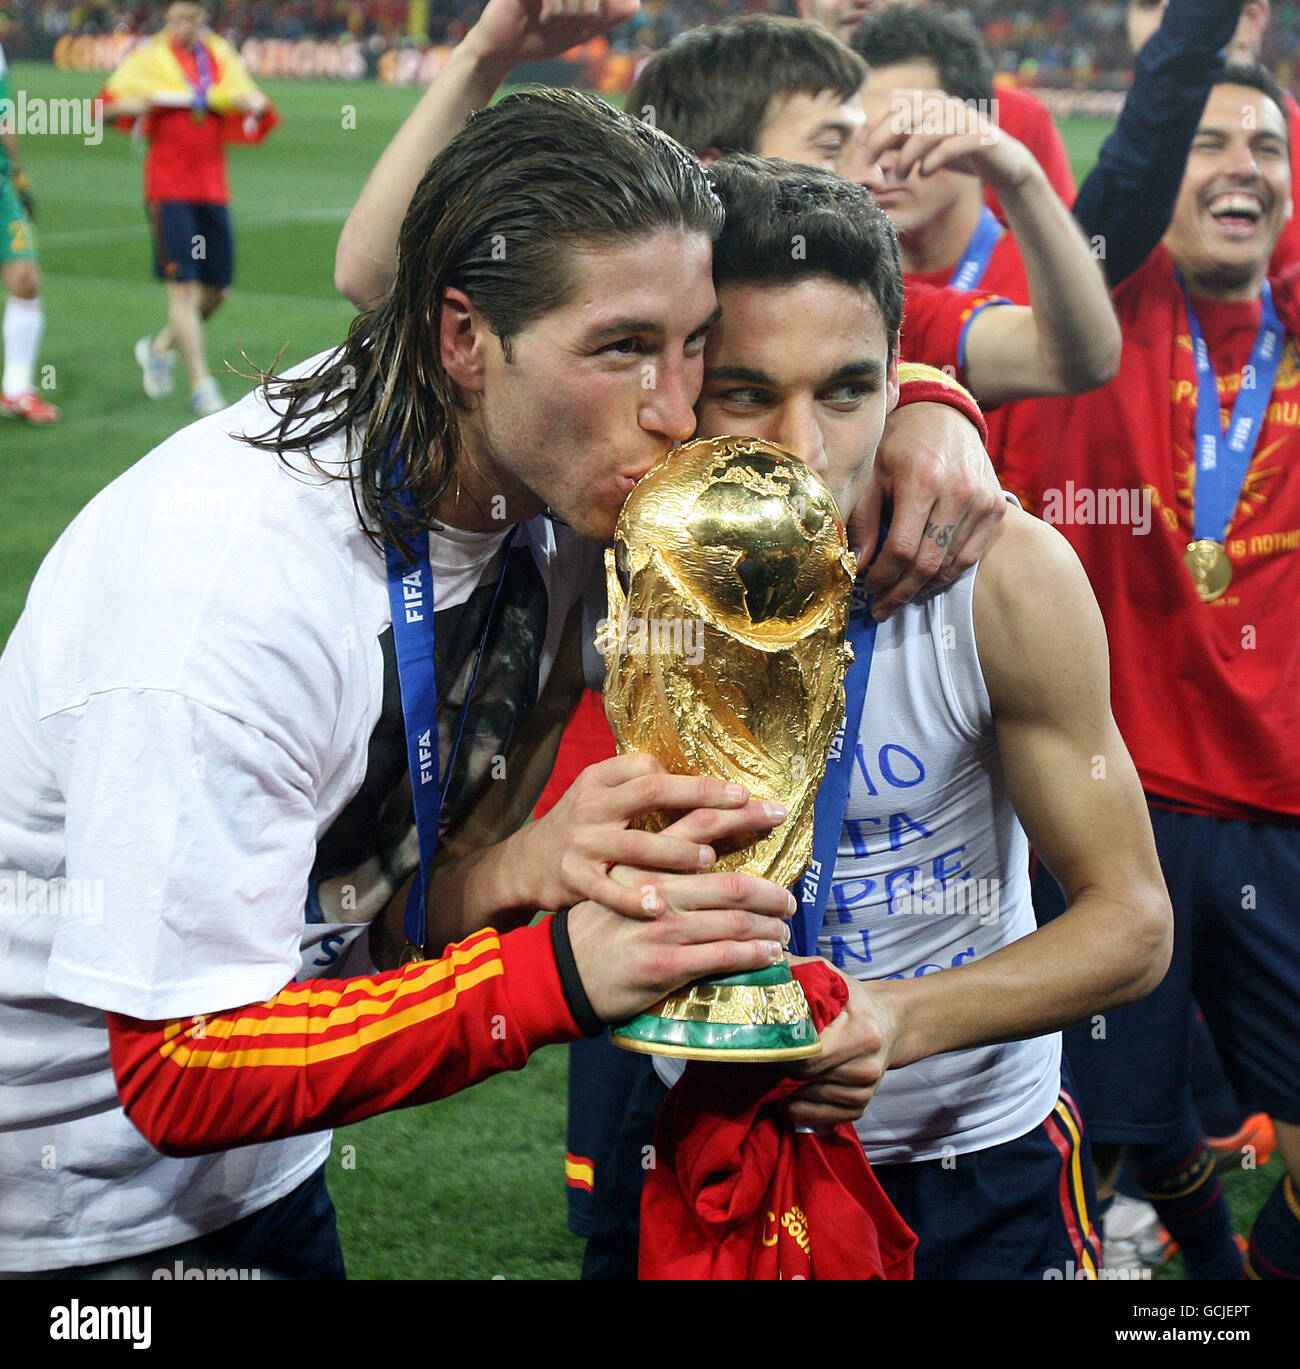 Soccer - 2010 FIFA World Cup South Africa - Final - Netherlands v Spain - Soccer City Stadium. Spain's Sergio Ramos and Jesus Navas celebrate with the World Cup trophy after winning against Netherlands Stock Photo